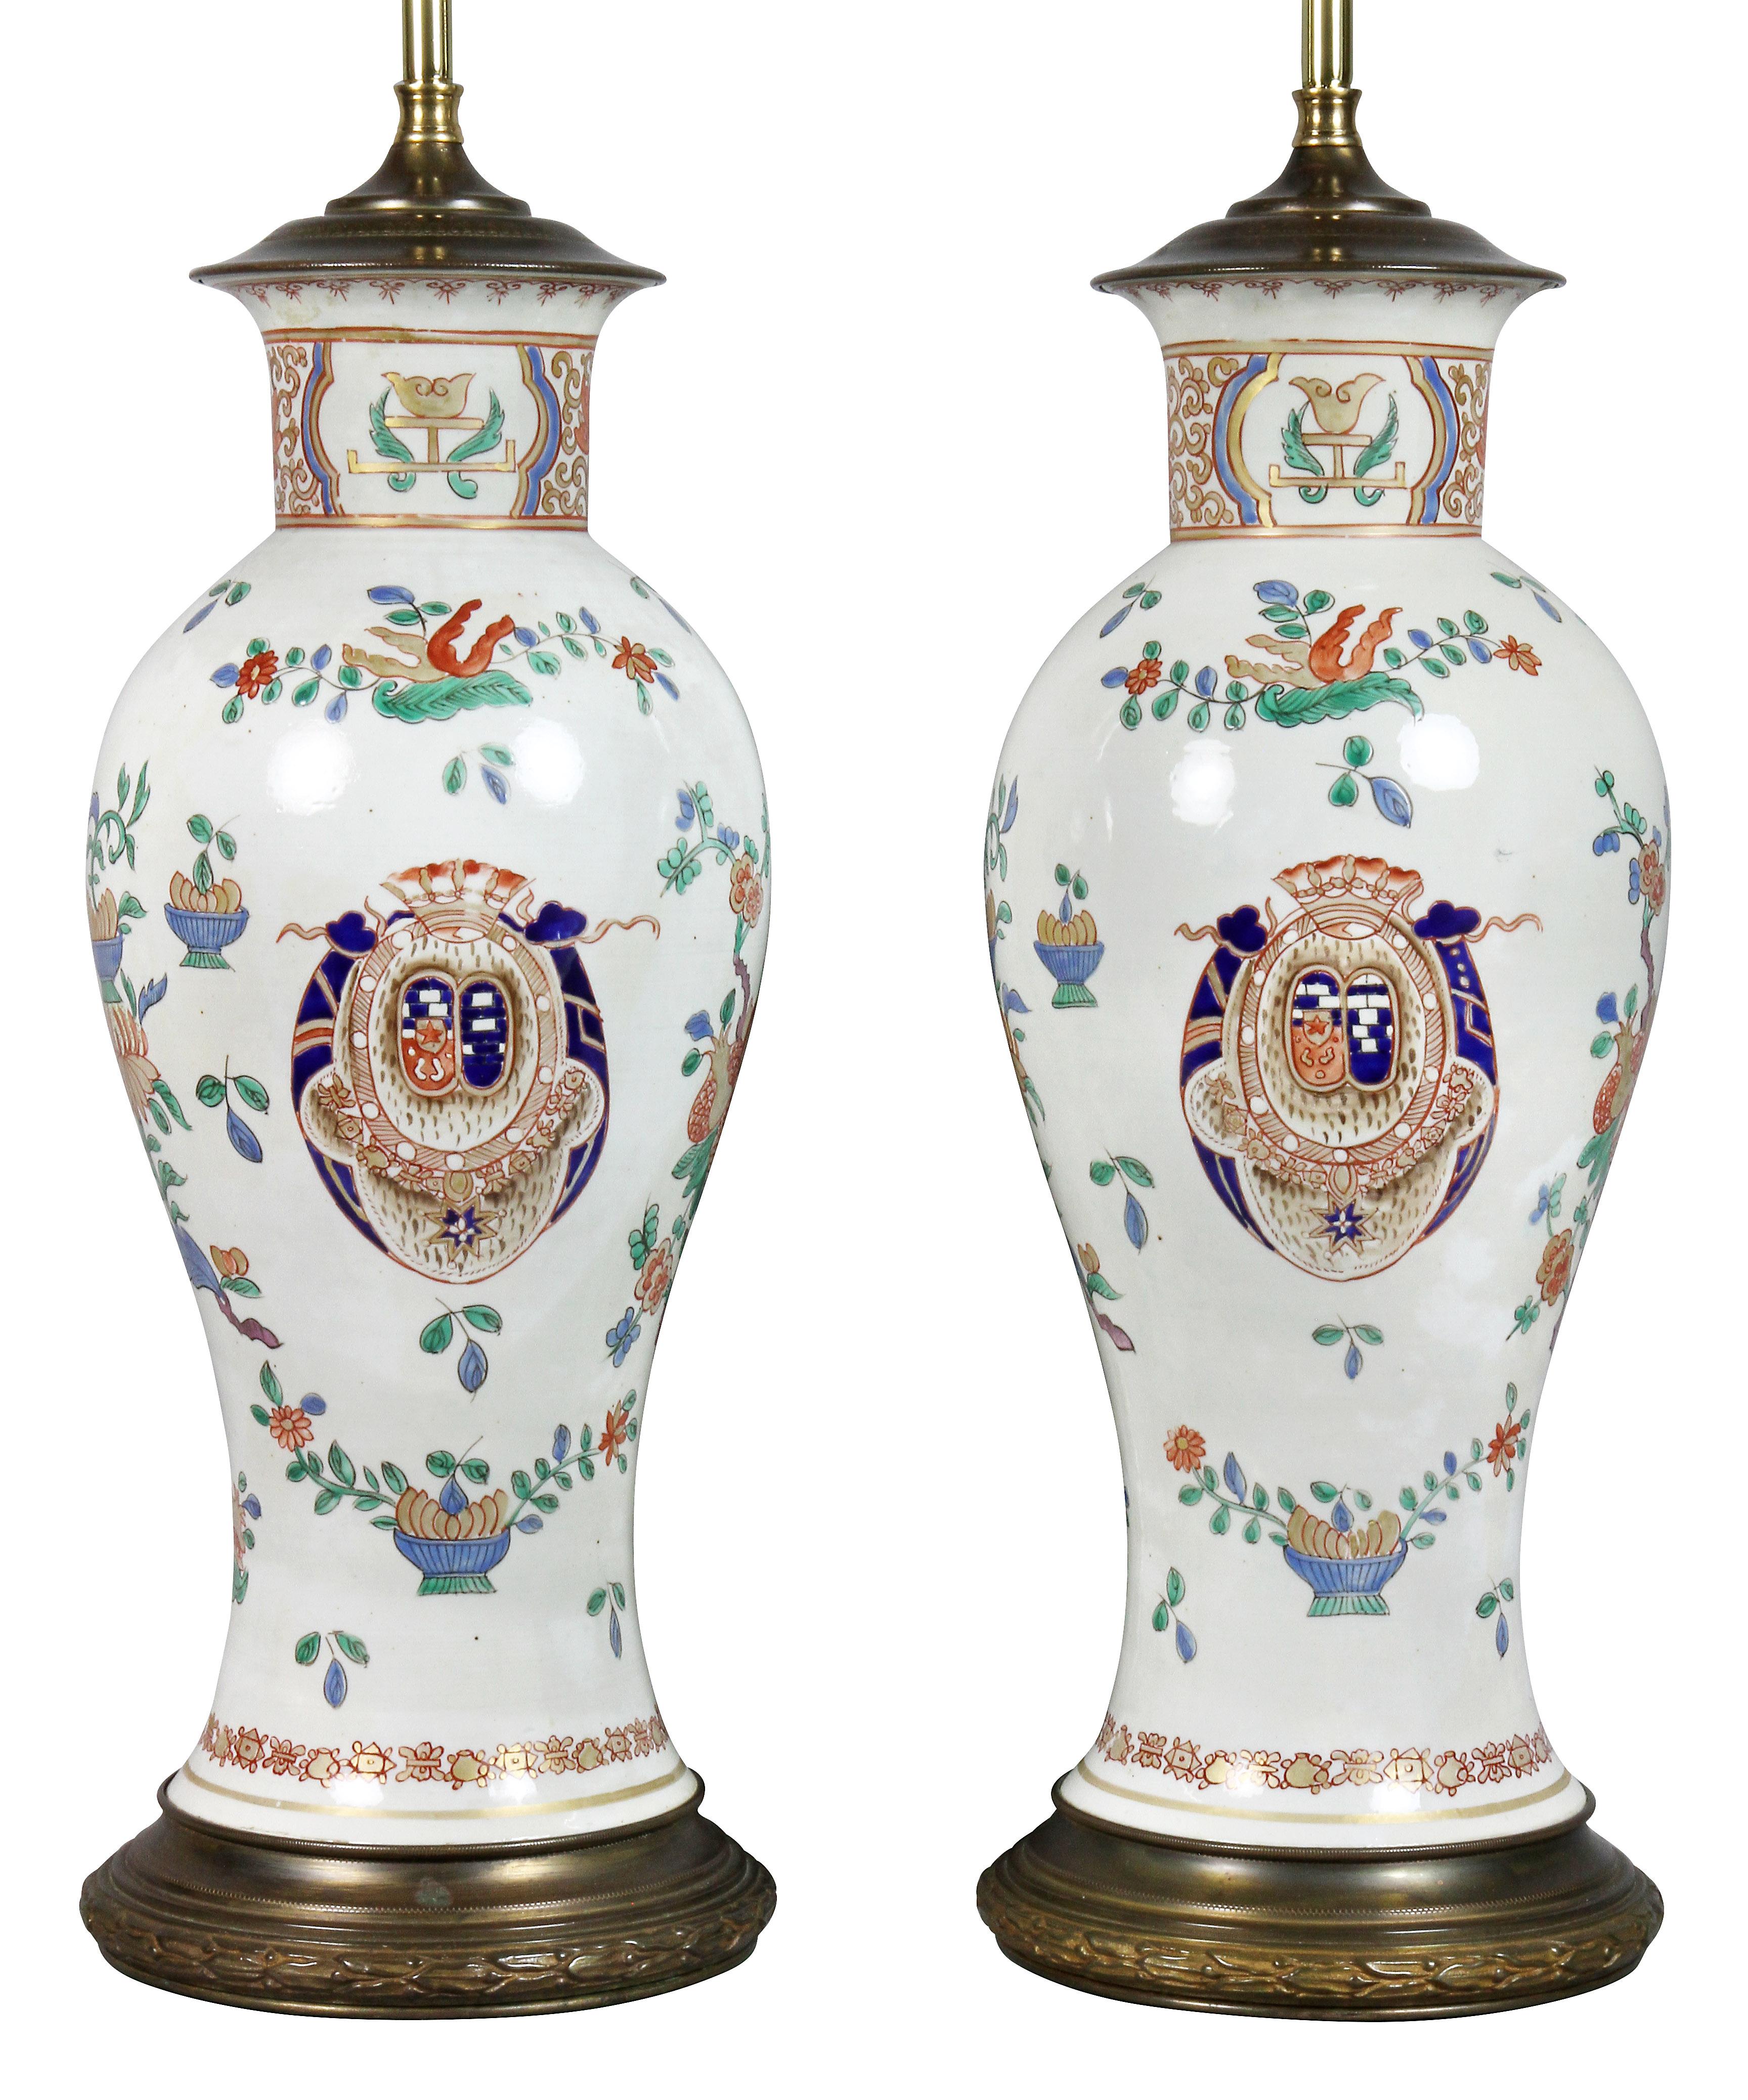 Baluster form decorated with a central crest with overall reds, greens and blues.